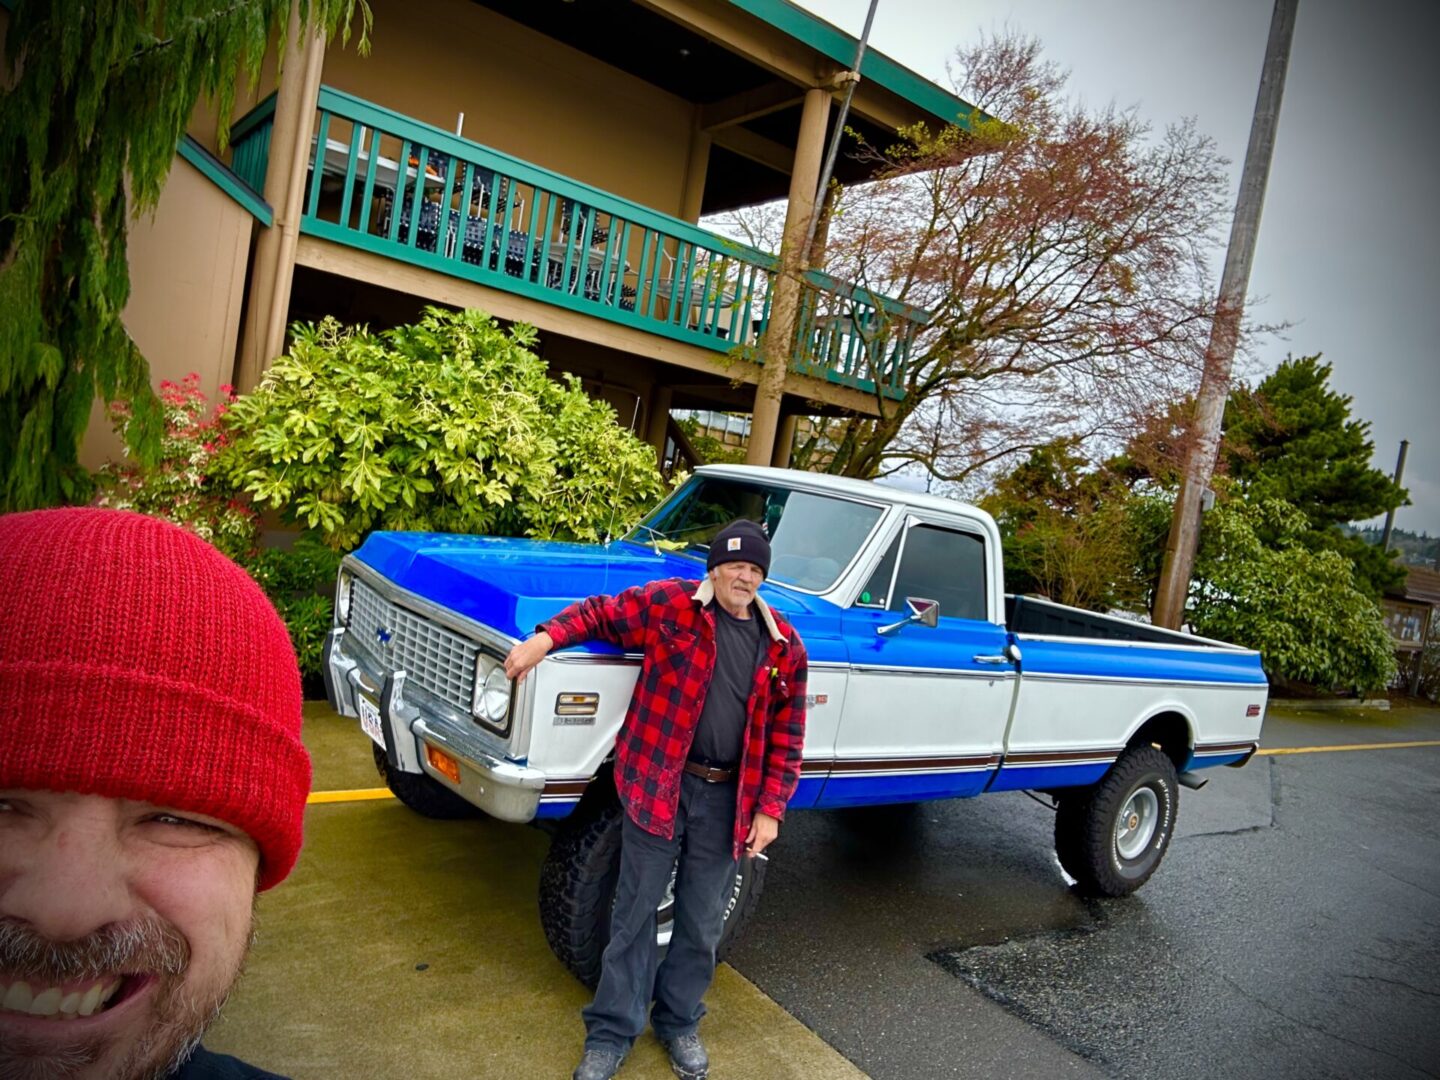 A man standing next to a blue and white truck.